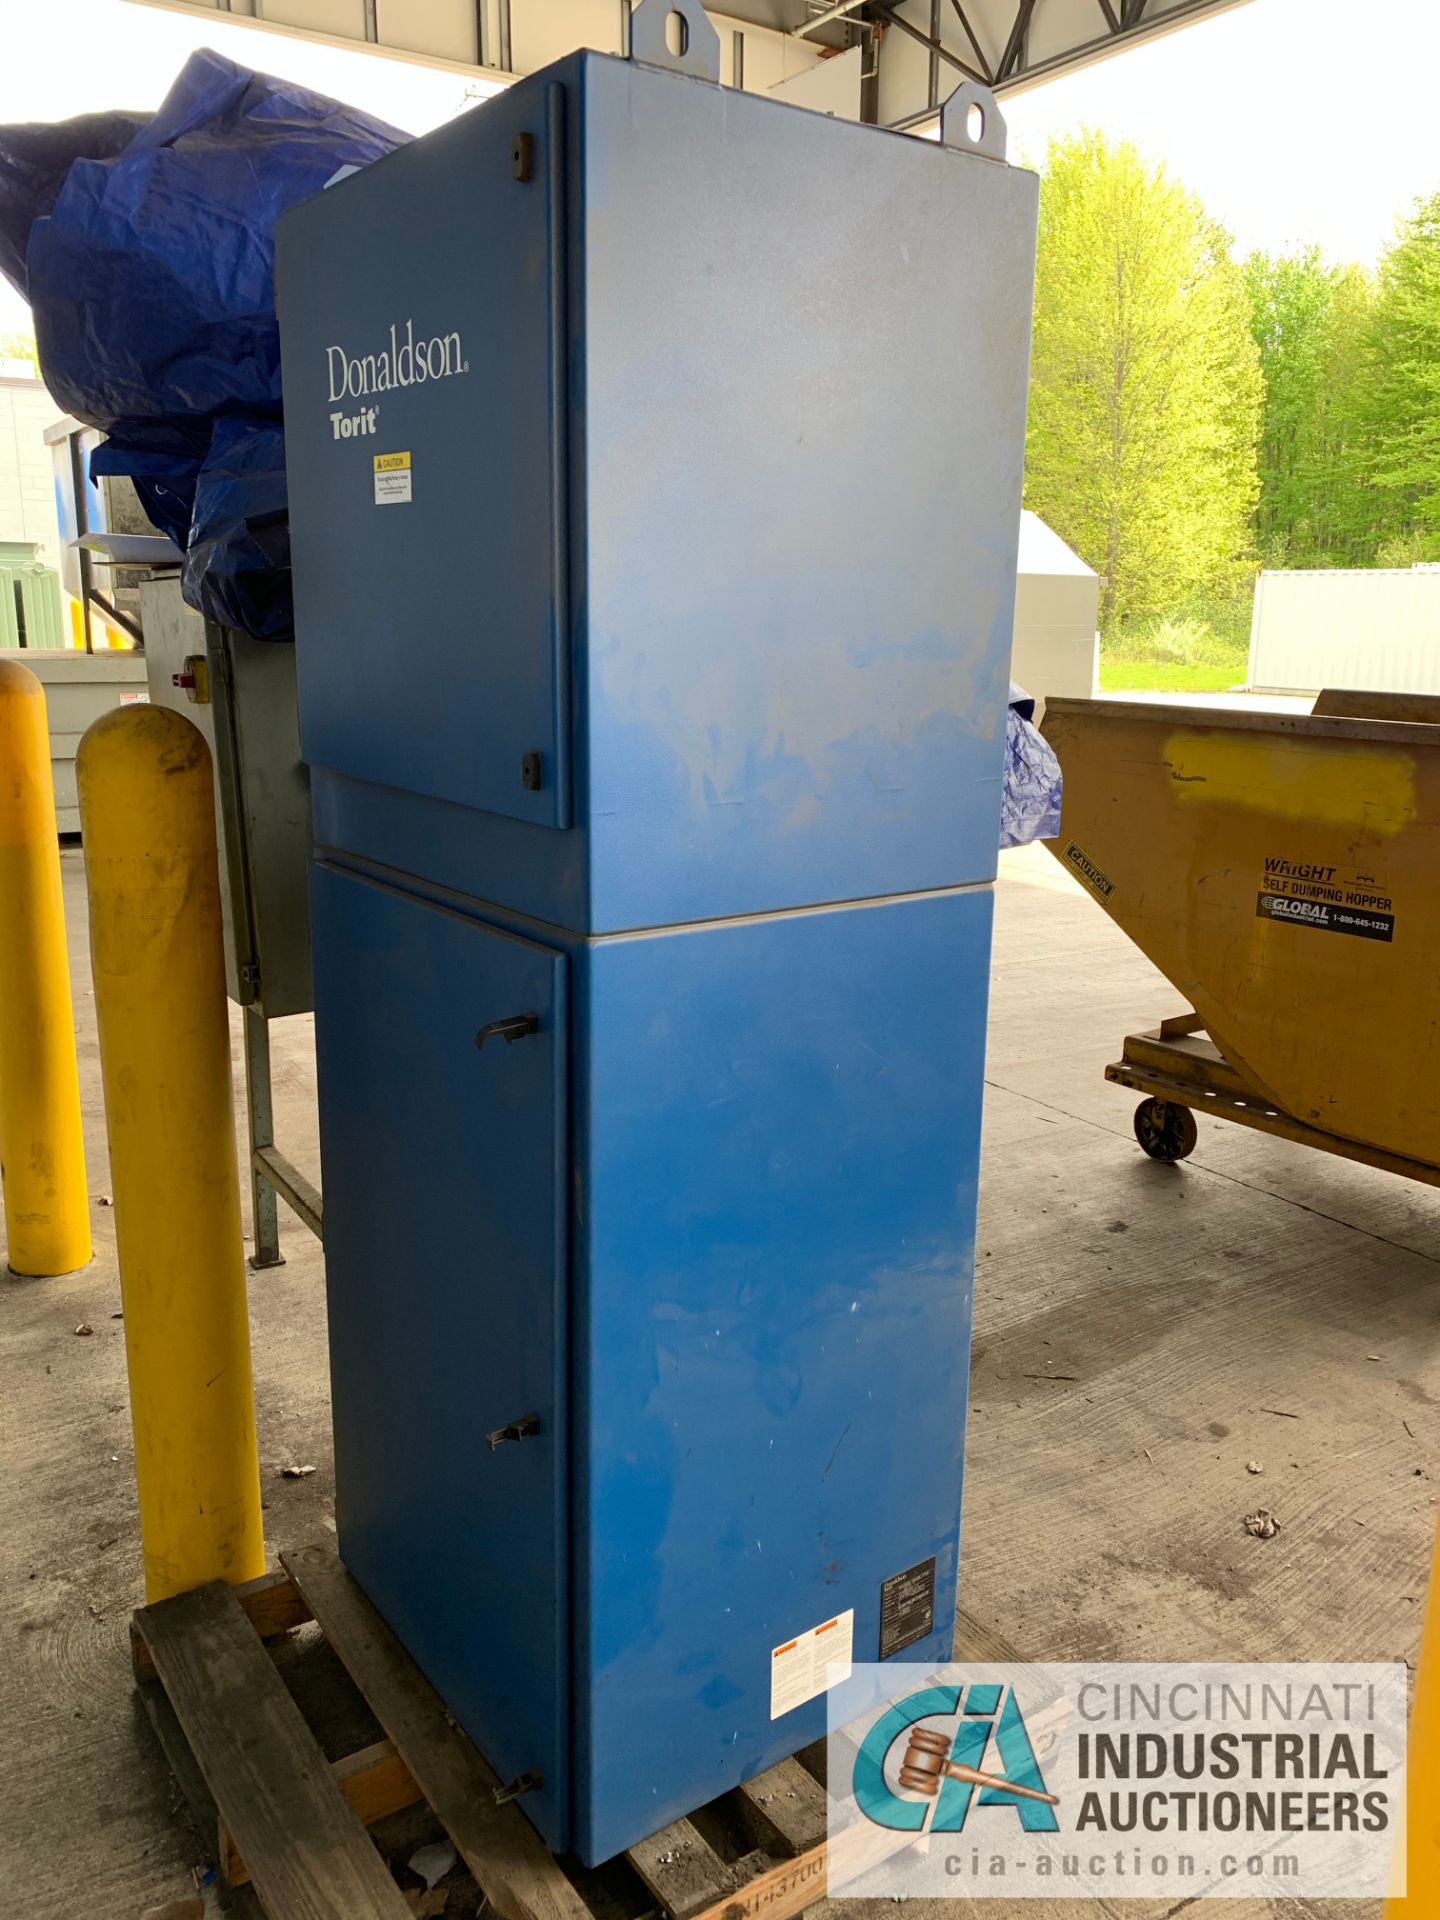 TORIT MODEL MDV 1 DUST COLLECTOR; S/N 12338966 L1, 3HP **RIGGING FEE DUE TO SHOEMAKER $75.00** - Image 2 of 5